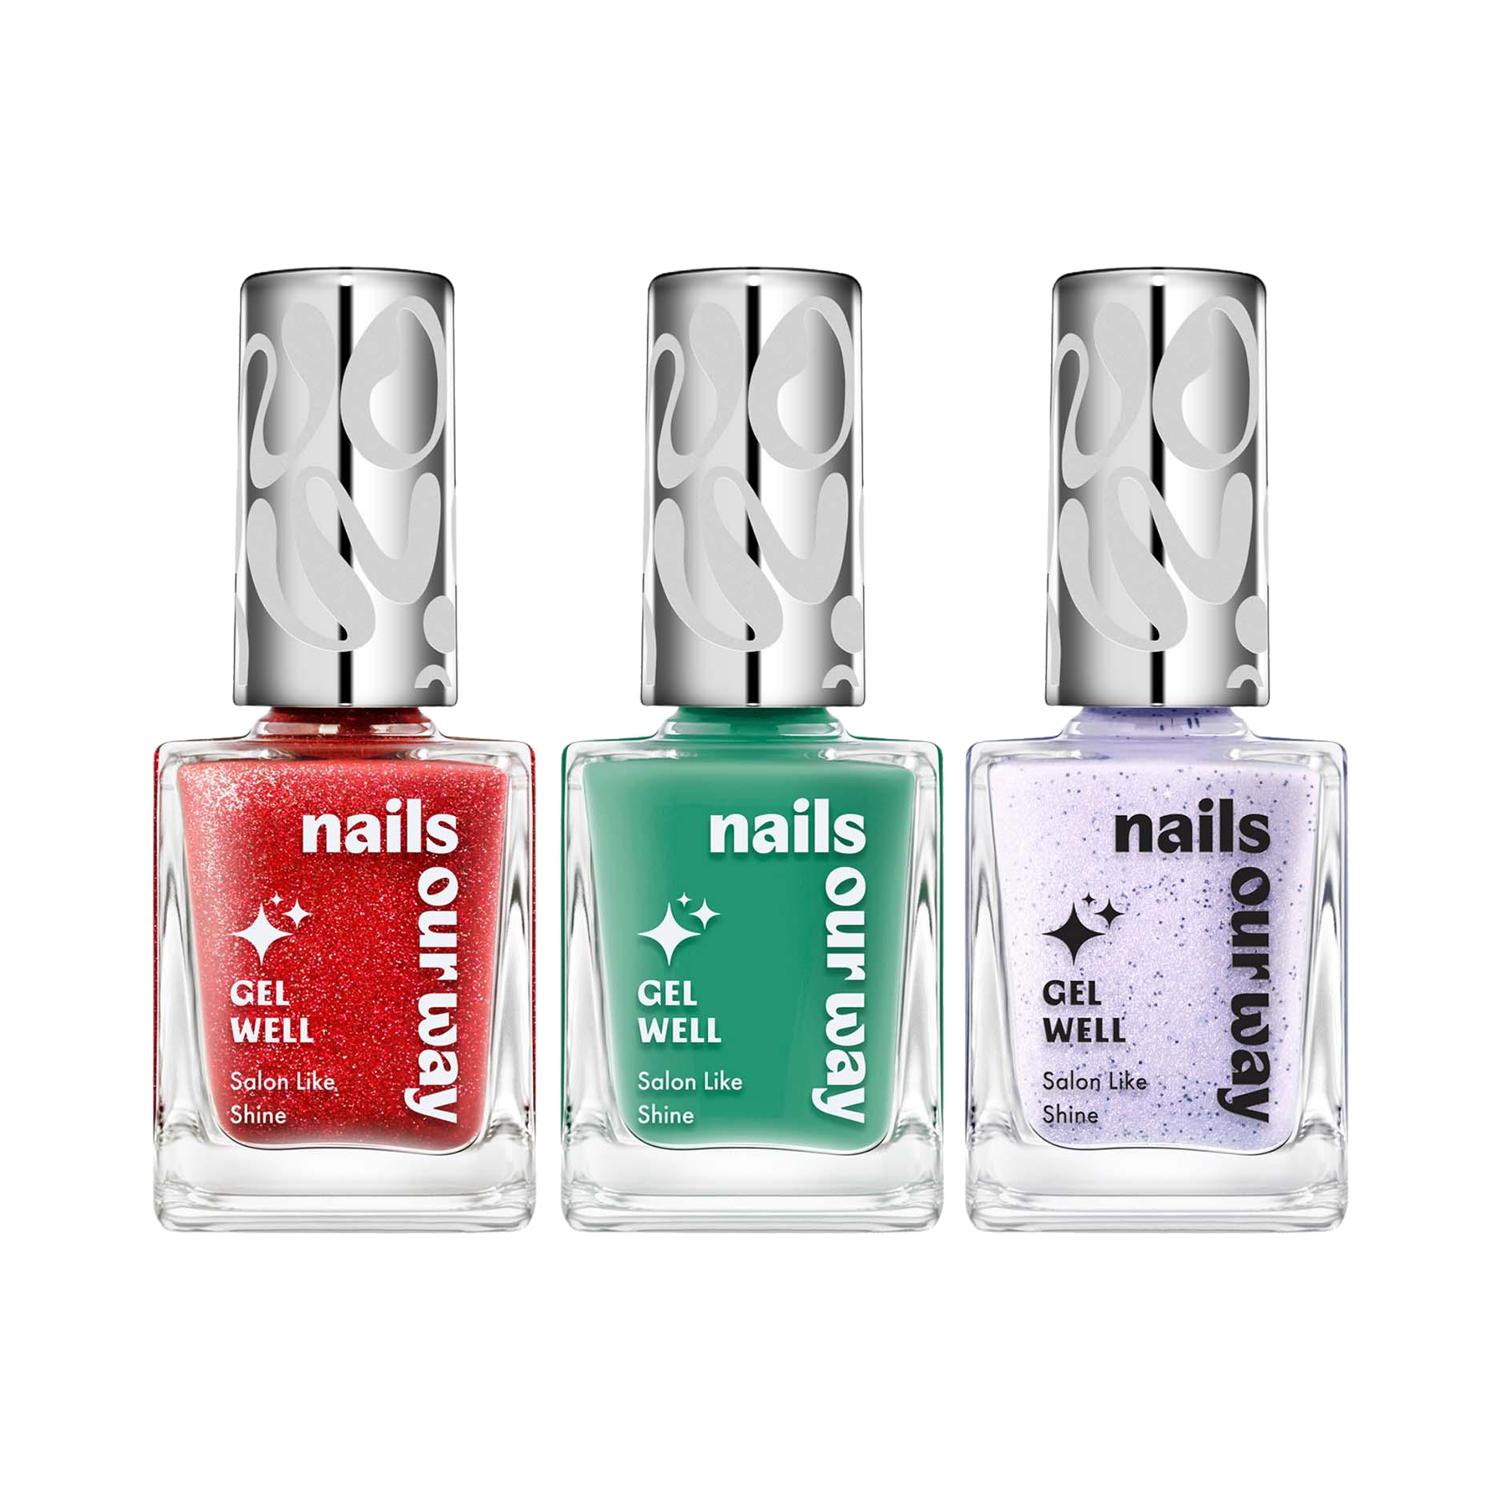 Nails Our Way | Nails Our Way Gel Well Nail Enamel Dirty Party Combo - Pk3